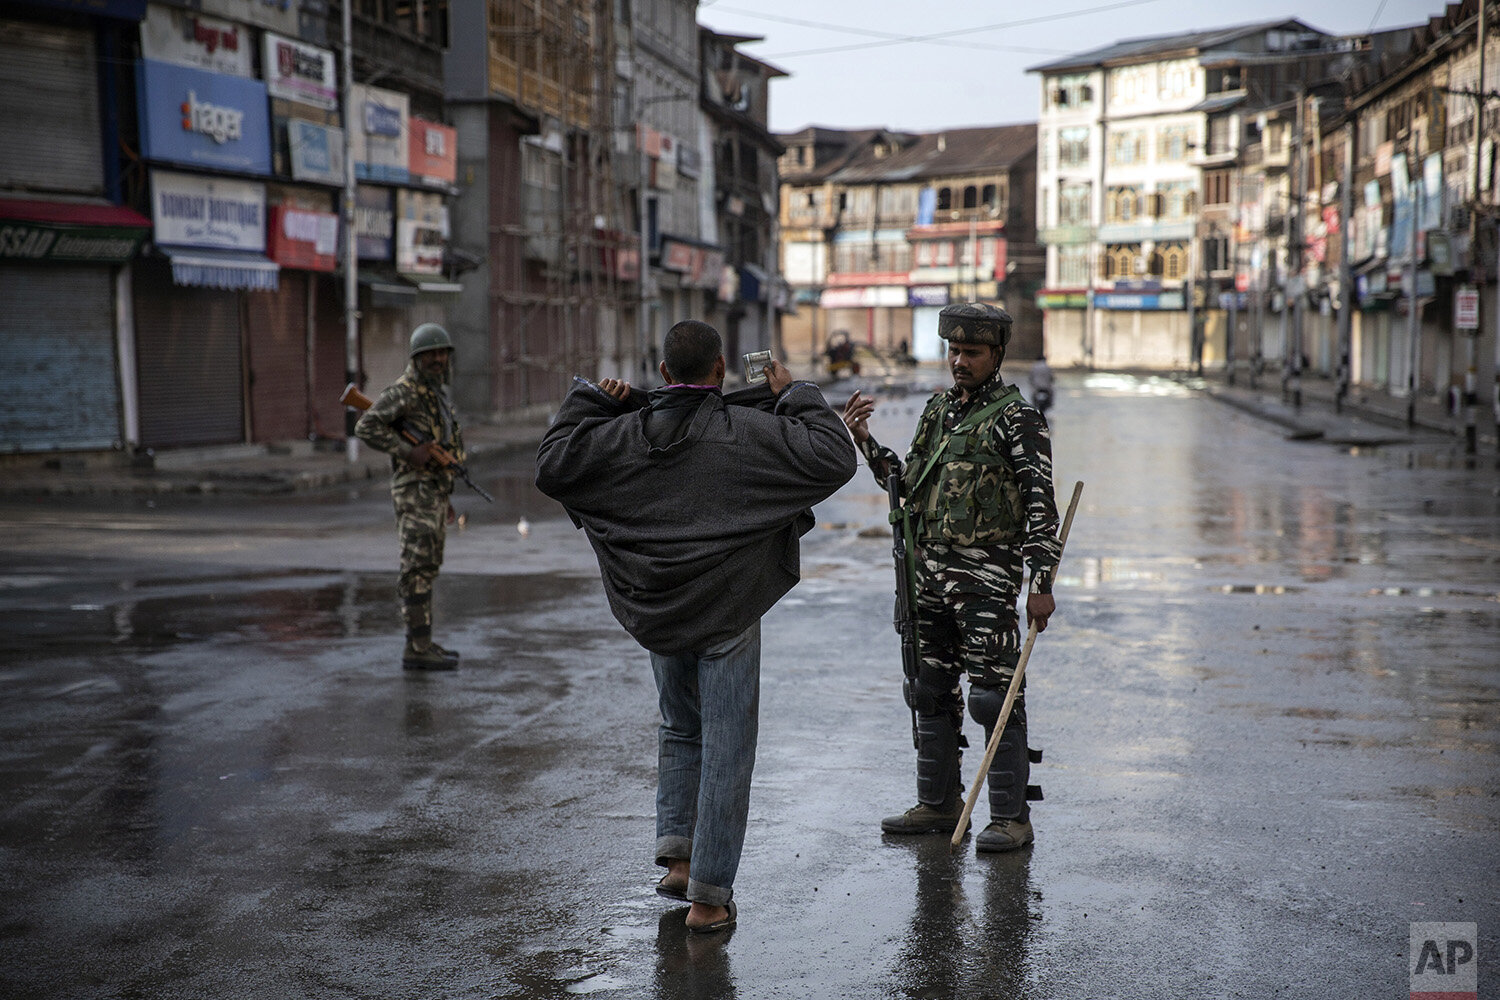  An Indian paramilitary soldier orders a Kashmiri to open his jacket before frisking him during curfew in Srinagar, Indian controlled Kashmir, Aug. 8, 2019. The beautiful Himalayan valley is flooded with soldiers and roadblocks of razor wire. (AP Pho